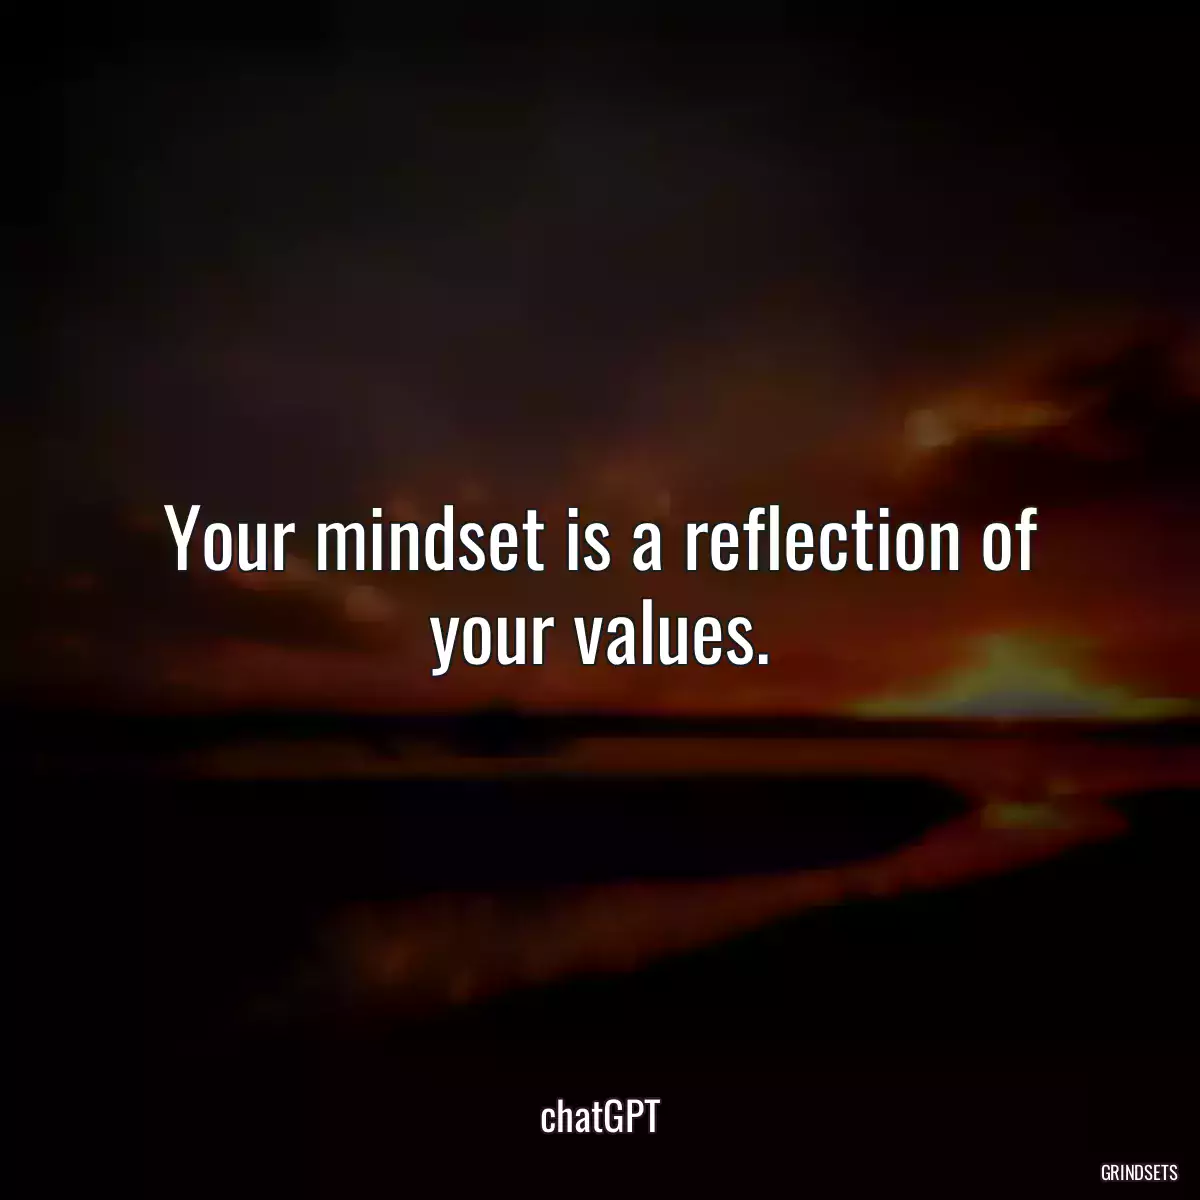 Your mindset is a reflection of your values.